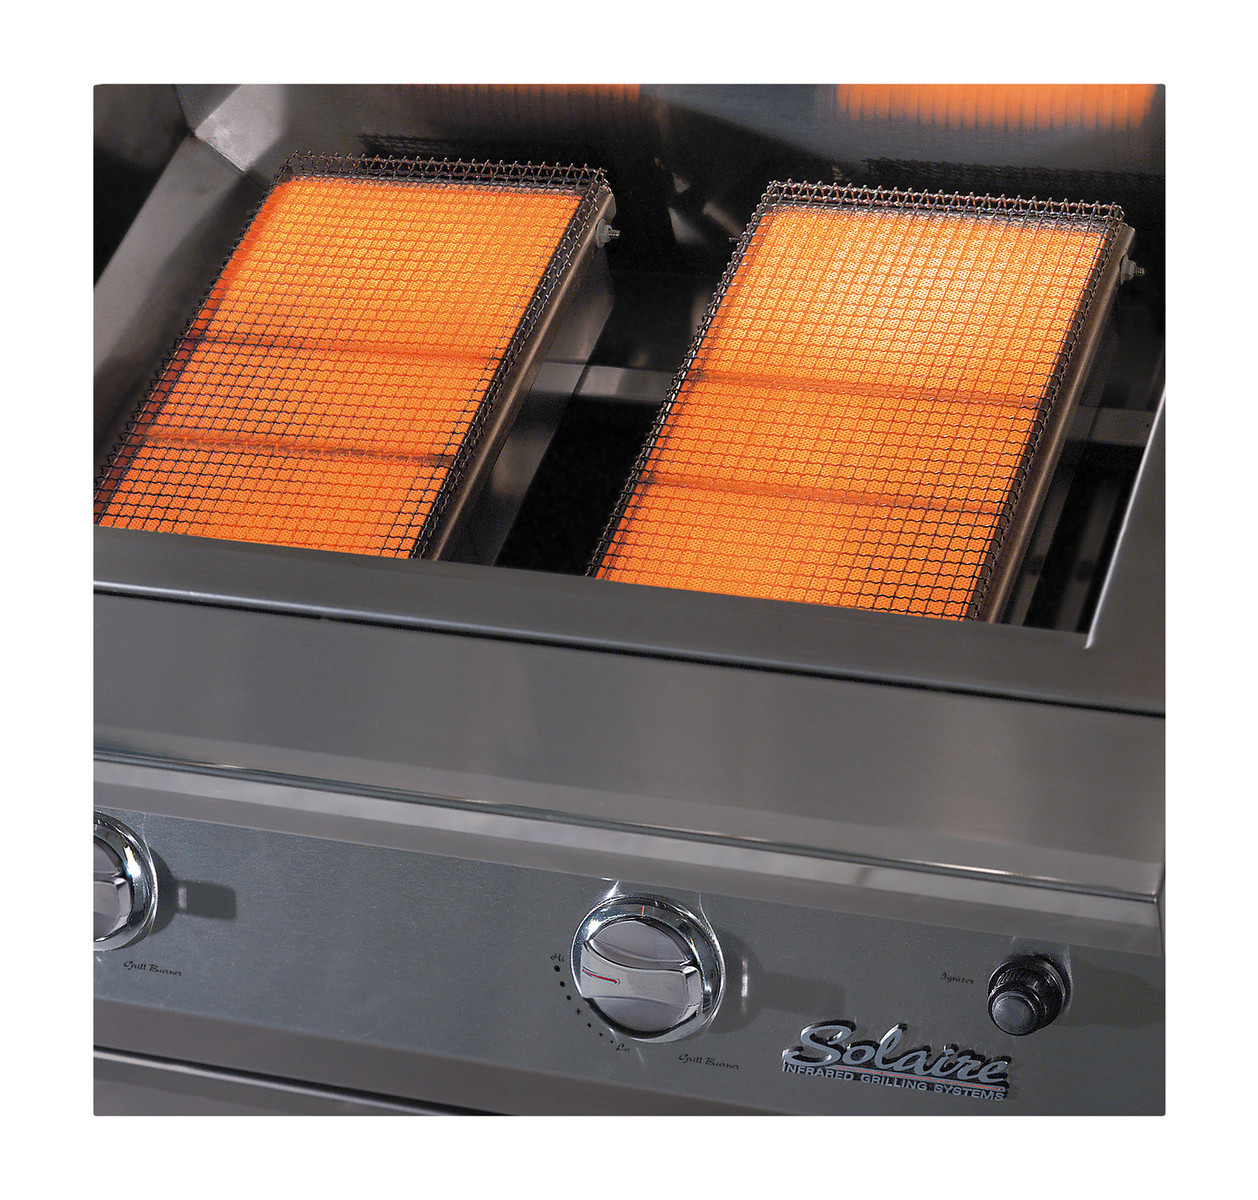 Solaire Infrared Burners